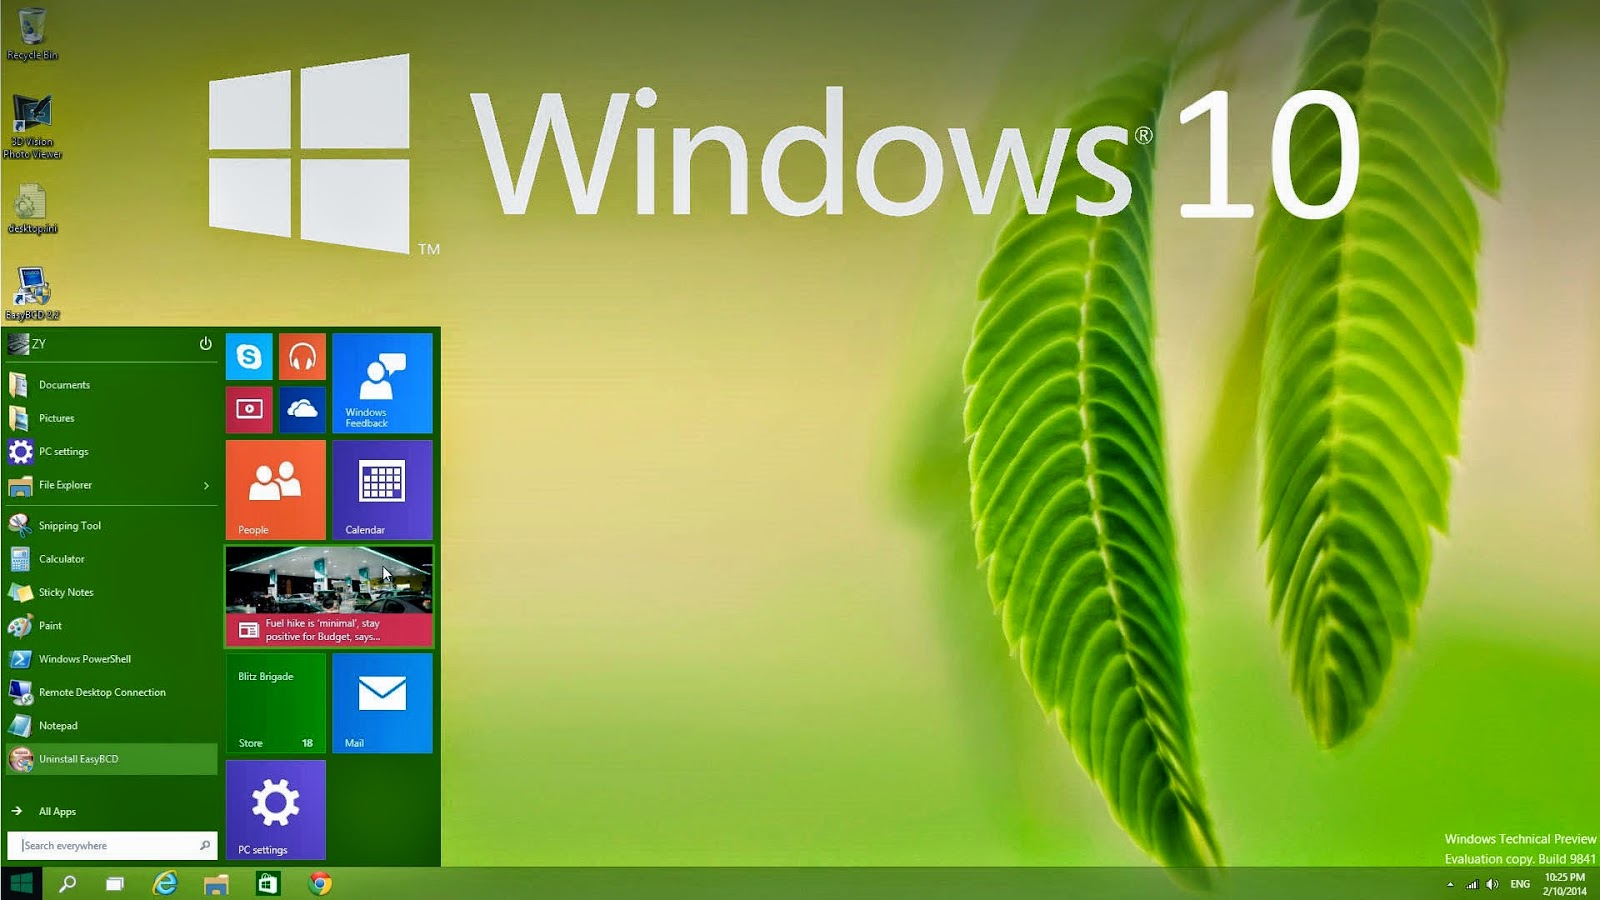 download the new version for windows iMazing